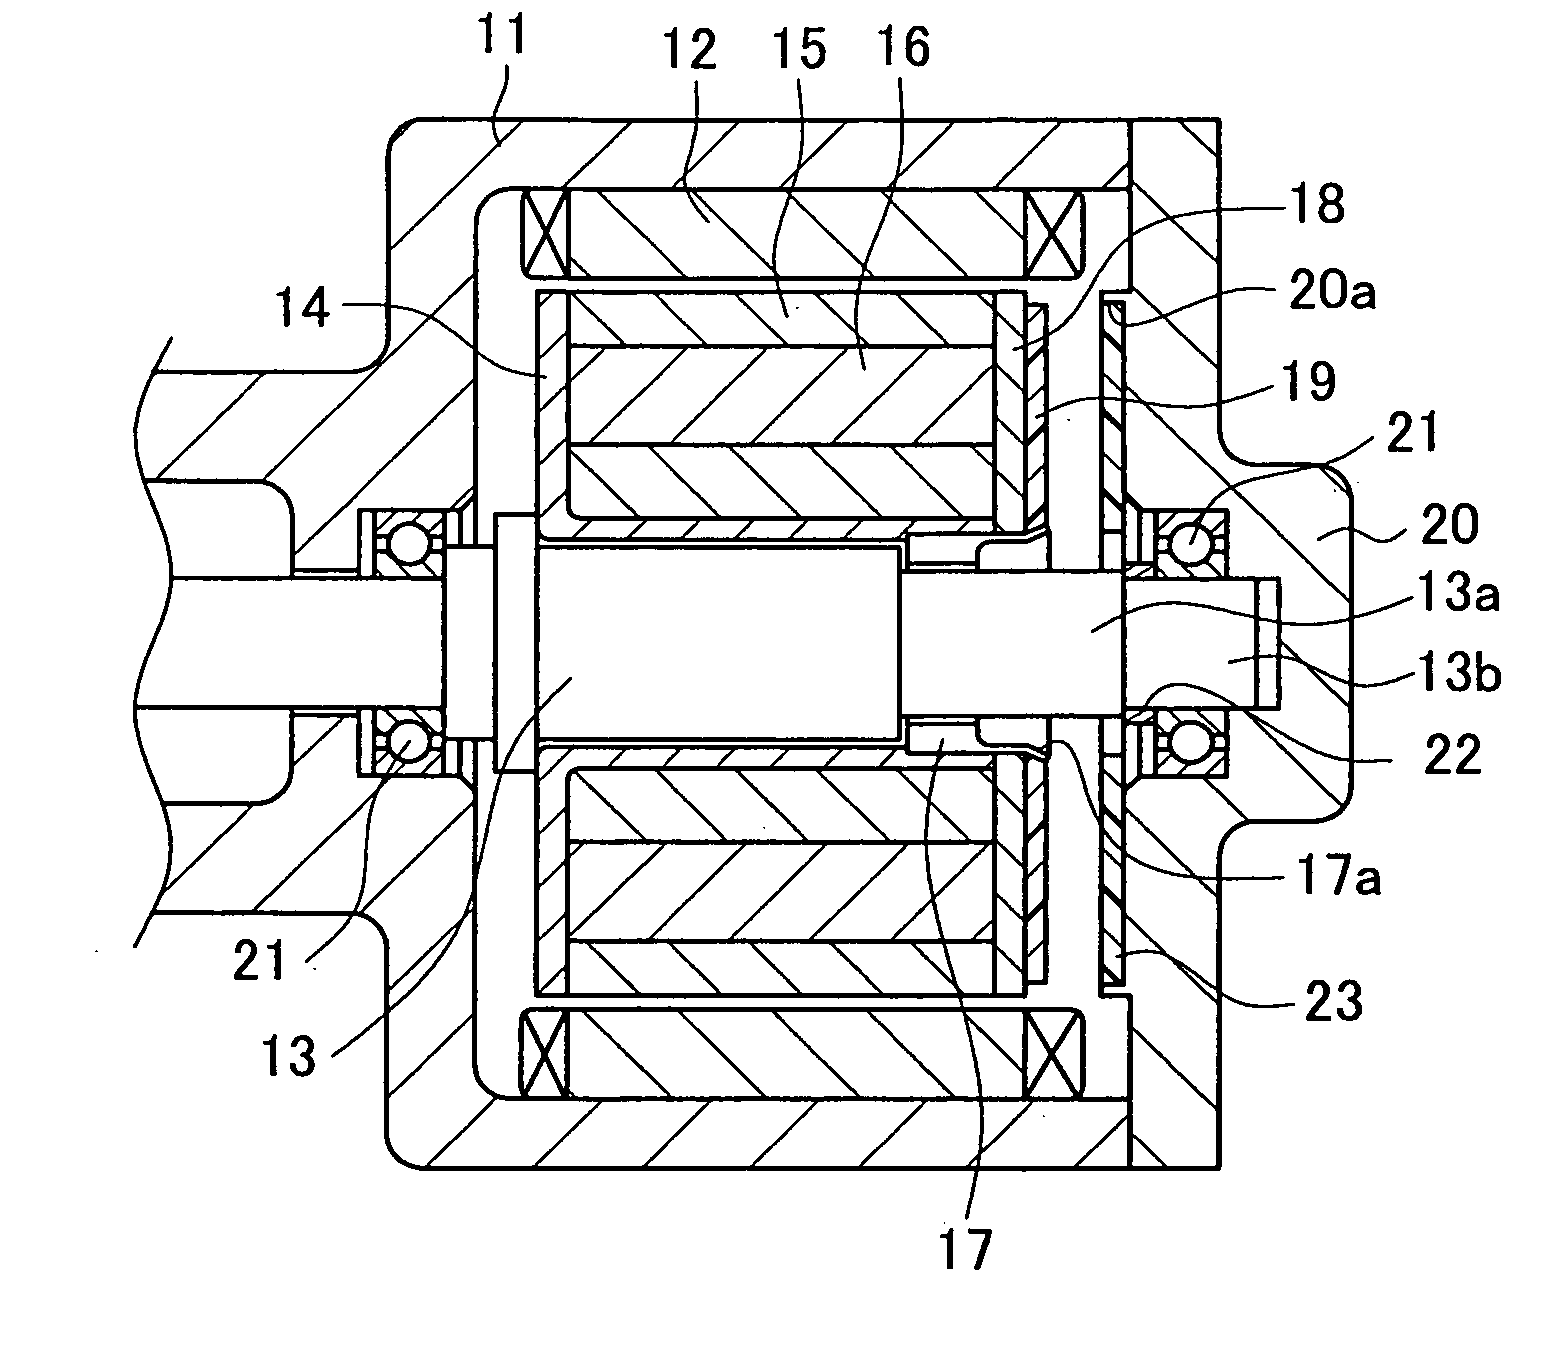 Motor structure with rotation detector